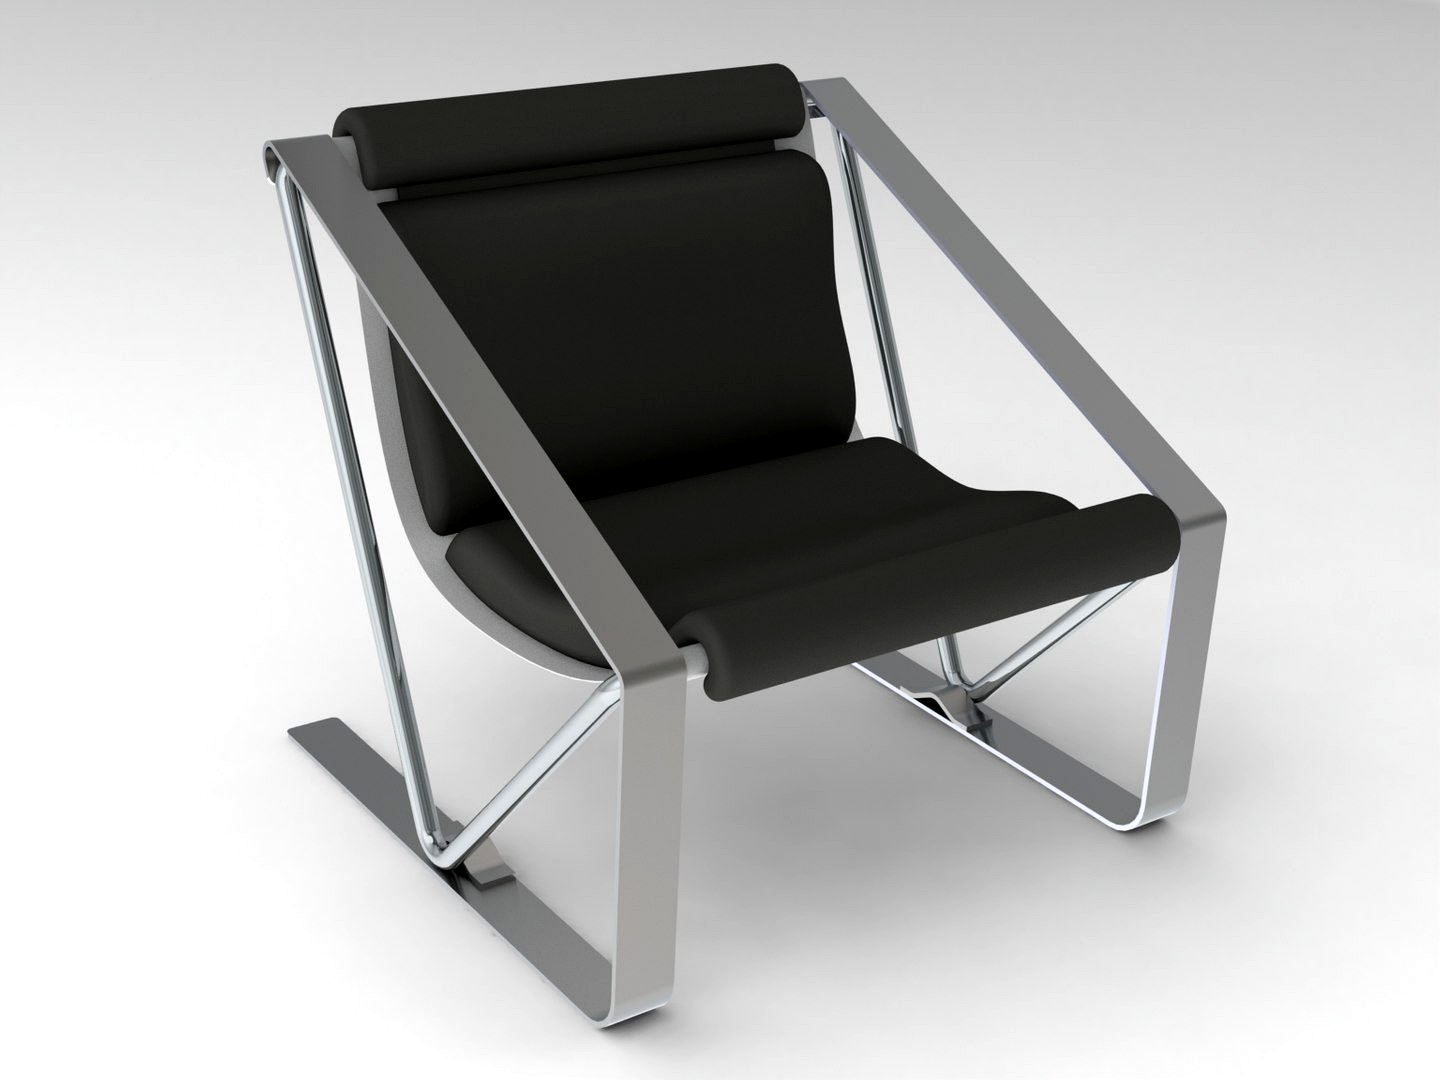 METAL CHAIR SOLIDWORKS 2017